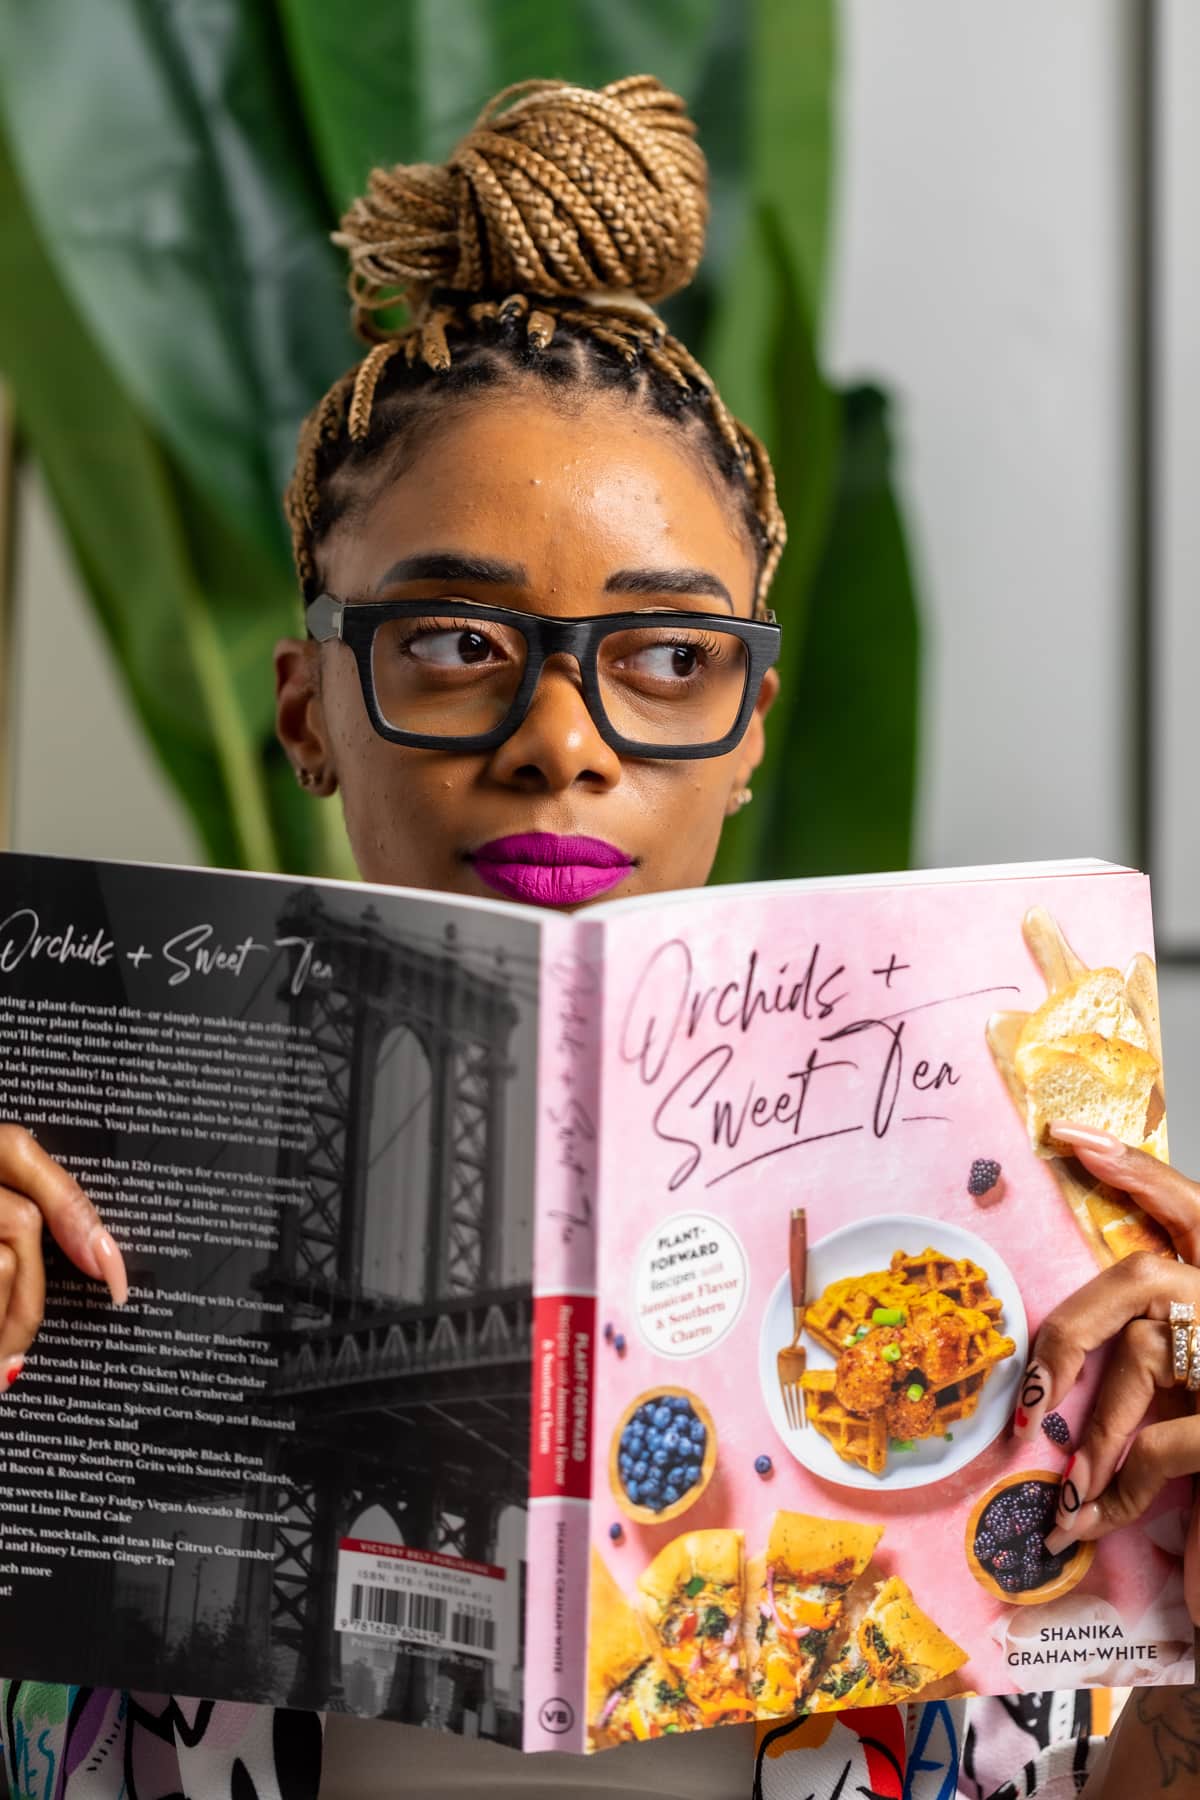 Shanika holding open the \"Orchids + Sweet Tea\" cookbook